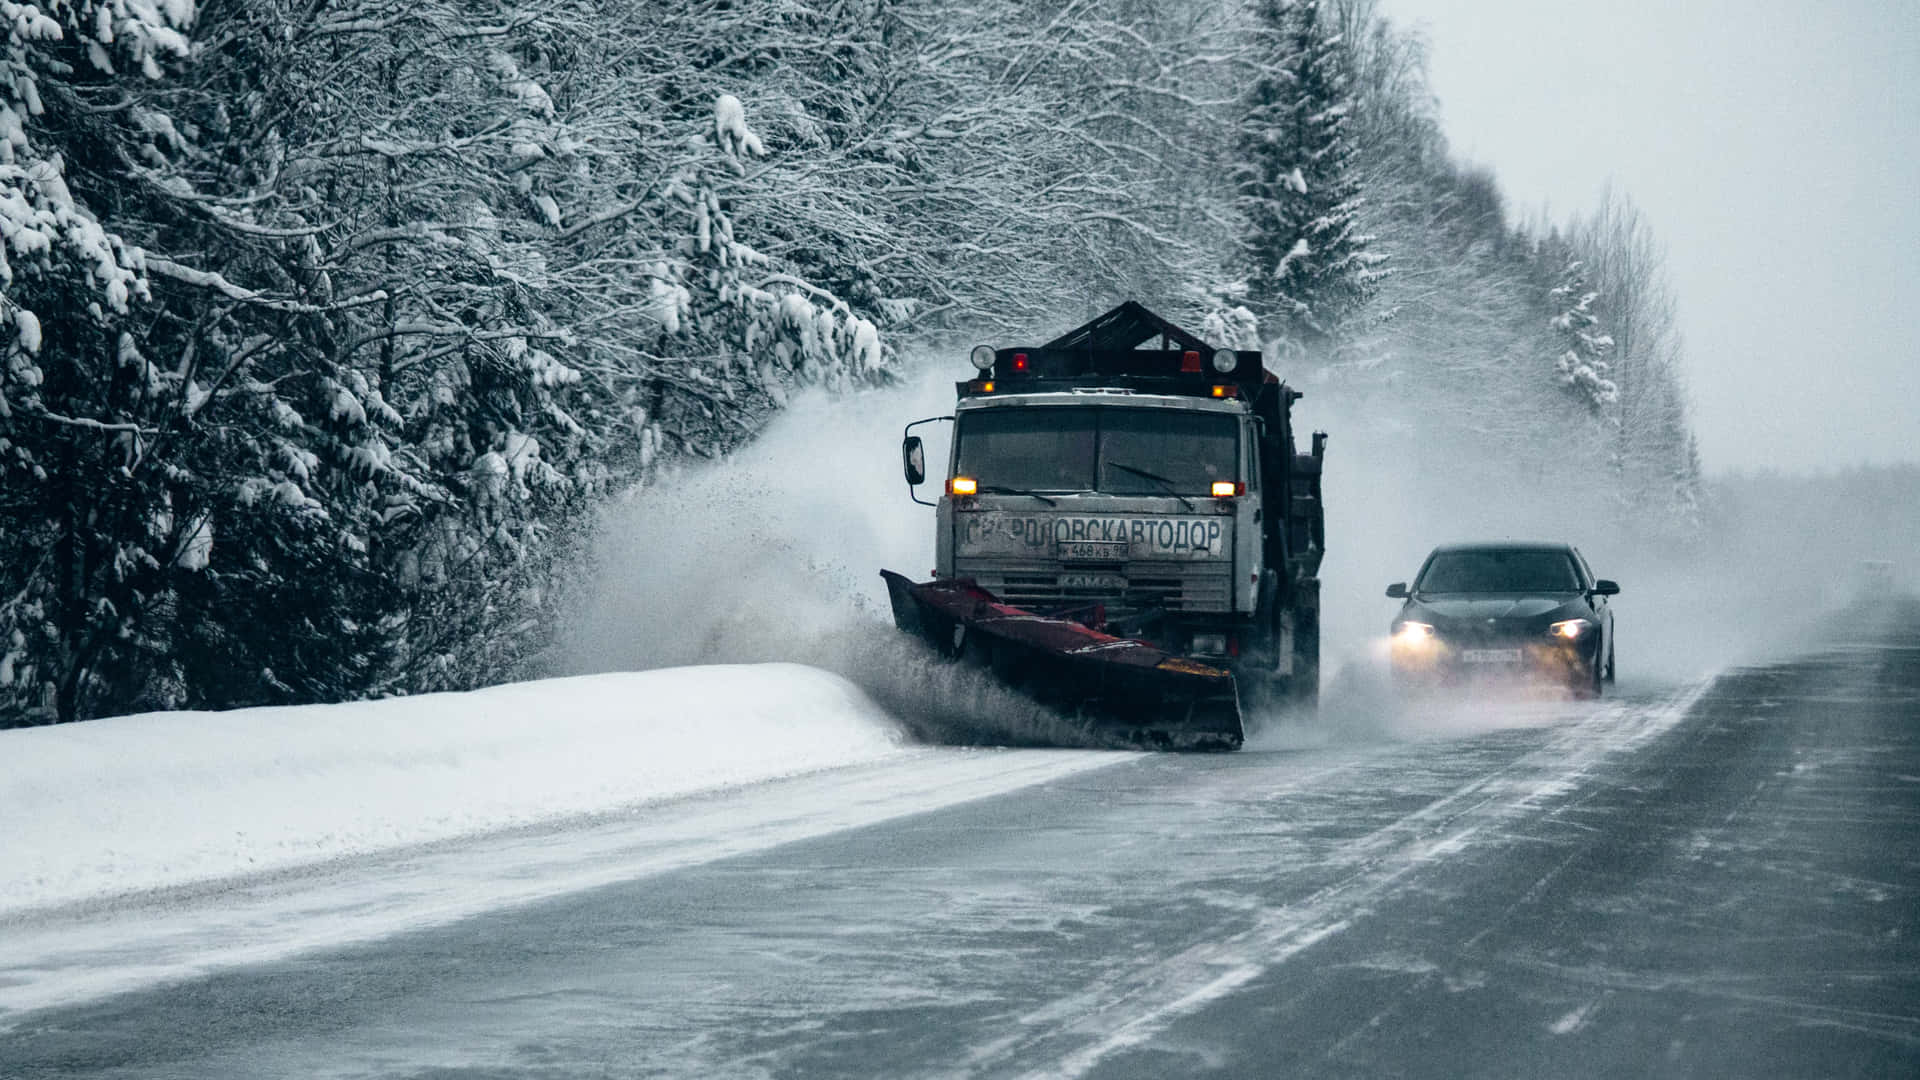 Powerful Snowplow Clearing Snow on a Mountain Road Wallpaper